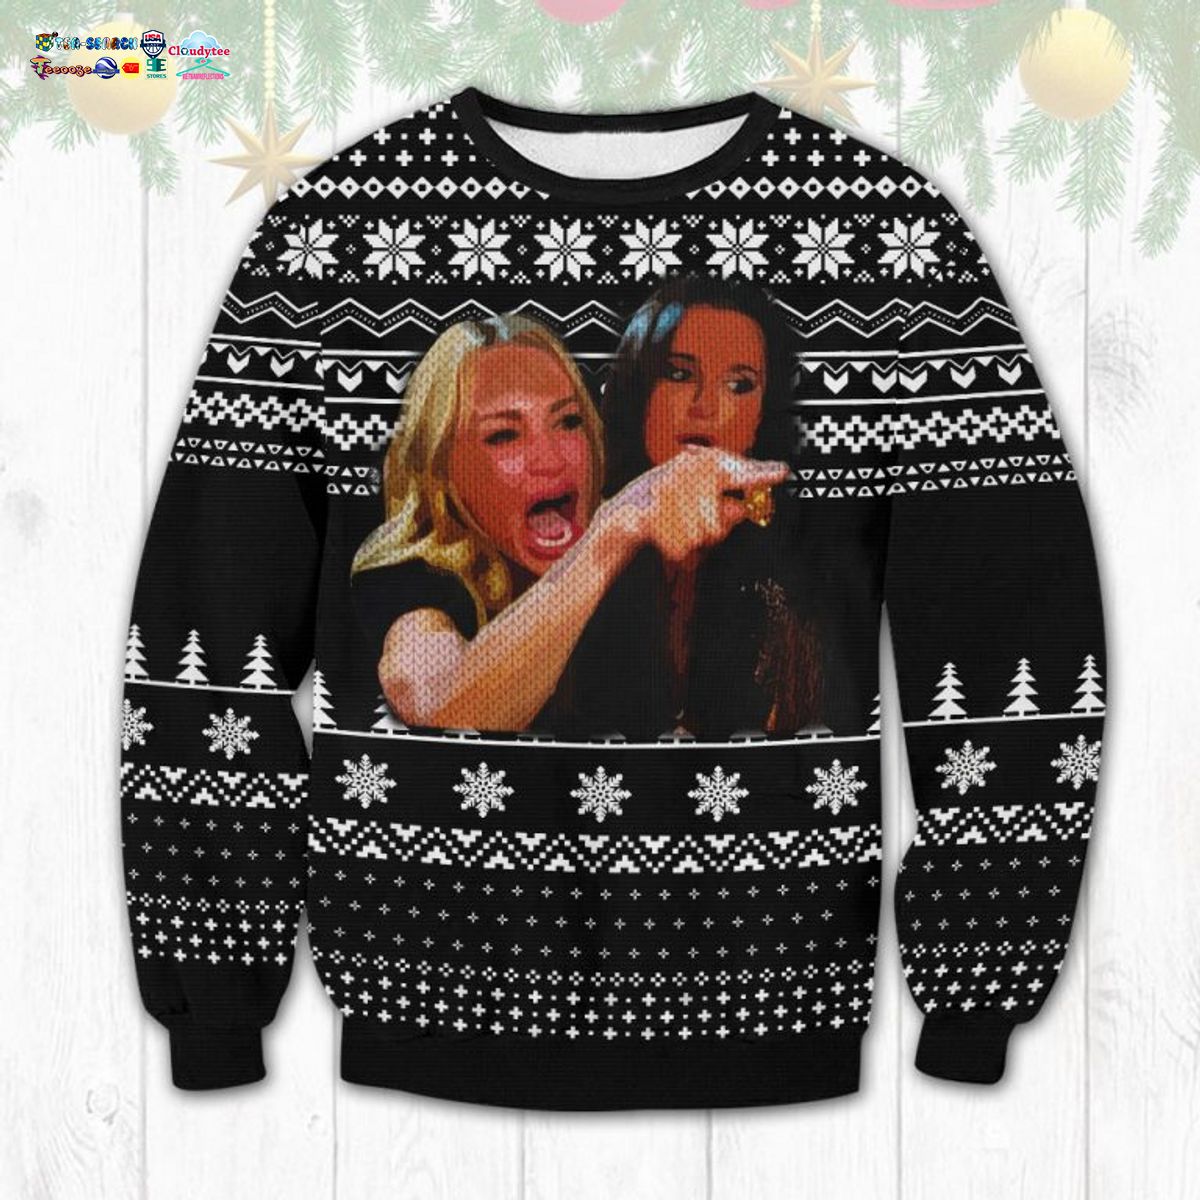 Woman Yelling At A Cat Meme Ugly Christmas Sweater - Great, I liked it